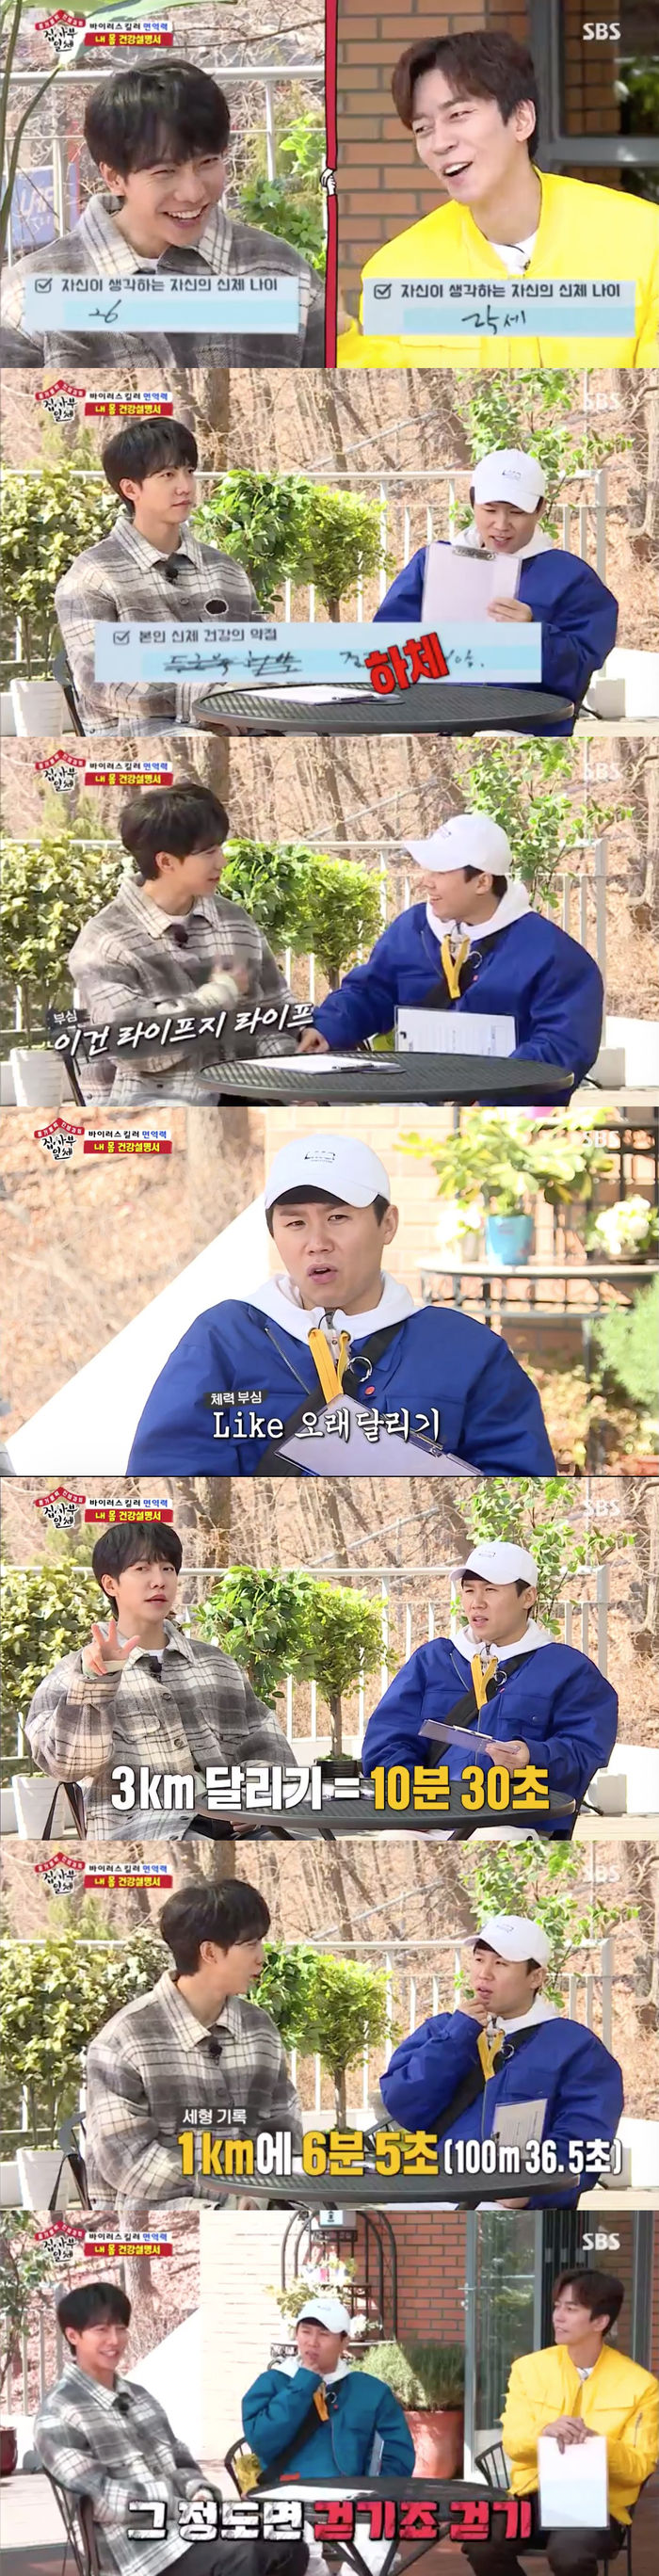 Lee Seung-gi showed off his fitnessOn SBS All The Butlers broadcasted on the 5th, it was decorated with health specials and had time to write their own paperwork.On the day of the broadcast, the members announced their own paperwork.Shin Sung-rok is 25 years old in his body, but his weakness is long and weak, he laughed.Lee Seung-gi wrote that his body age was 26 years old, so Lee Seung-gi said, I was 25 years old because I did not have a conscience.Shin Sung-rok said, If you look at it, you are really like me.Yang Se-hyeong then said Lee Seung-gis health weakness was Hatje Cantz Verlag, who said, Who read the stuff?Hatje Cantz Verlag. My Hatje Cantz Verlag is a life life, a second heart, he said. Please read it properly.Lee Seung-gi also cited his health feelings as strong physical strength, and he said, I am good at running for a long time.I cut 3km to Army Special in 10 Minutes 30 seconds. Yang Se-hyeong said, It is ridiculous, he said. I take about 6 minutes and 5 seconds per kilometer.Lee Seung-gi, who heard this, quipped, Walking to me, walking.